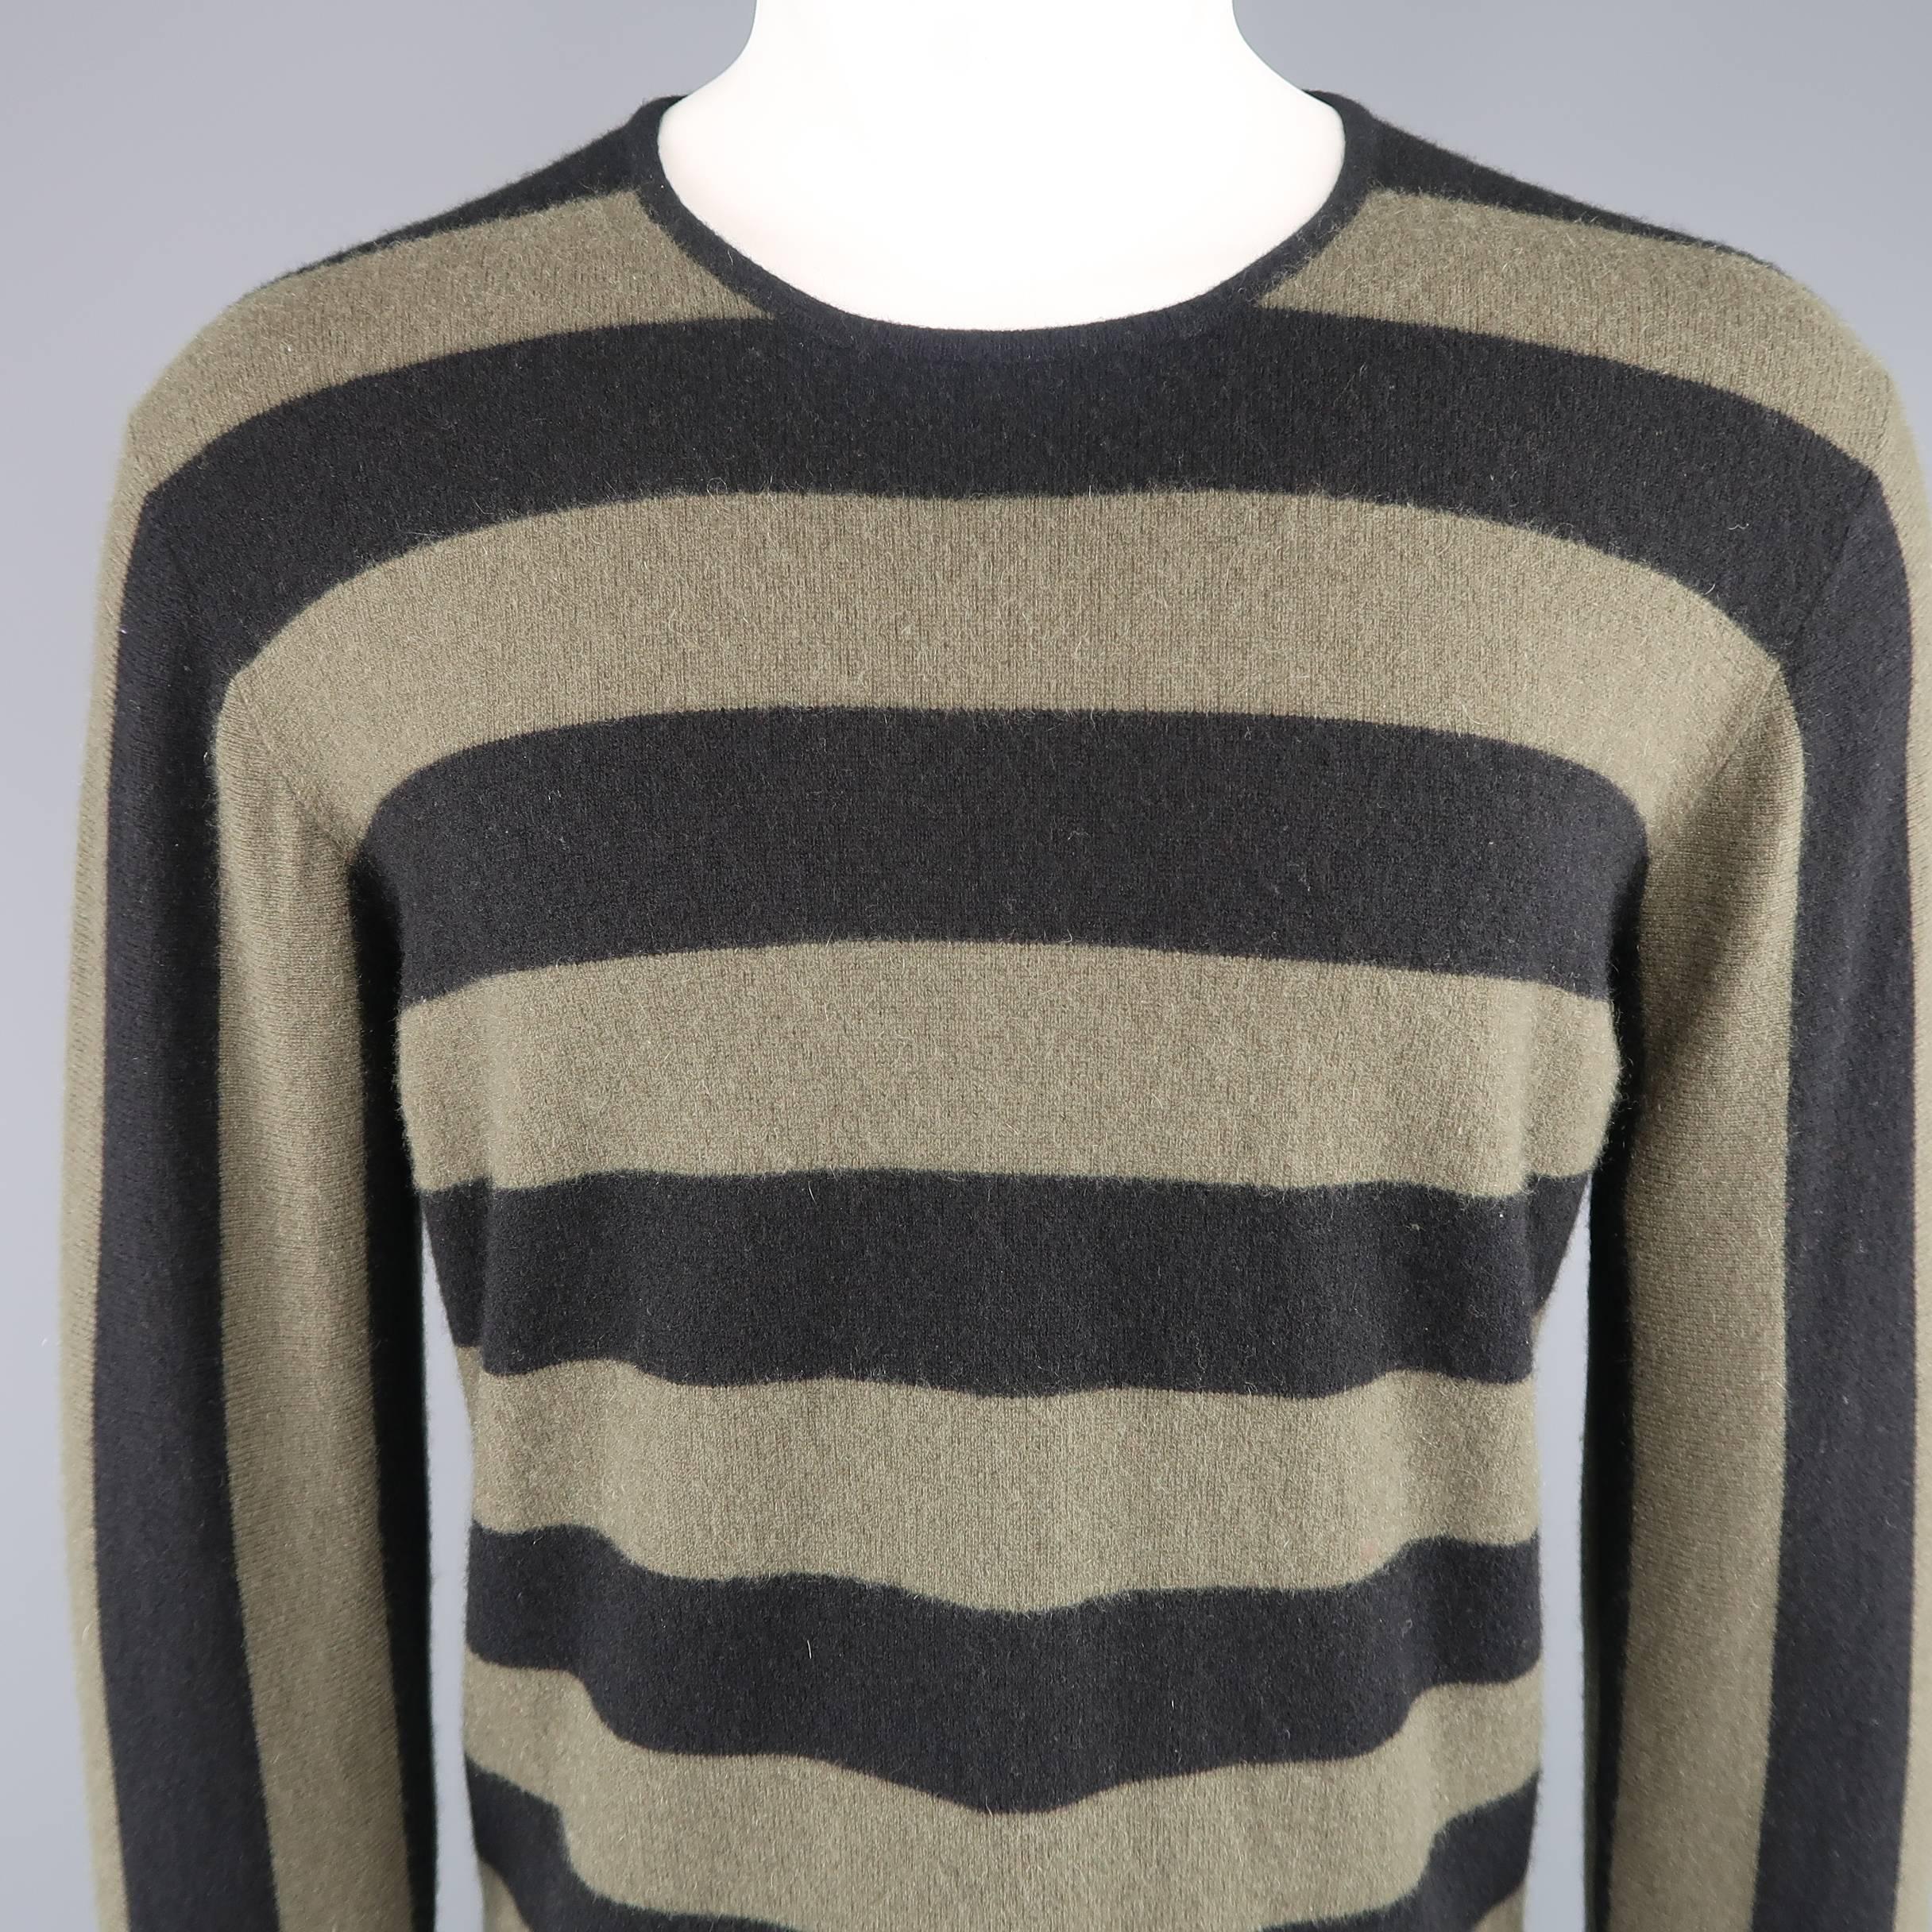 JIL SANDER pullover sweater comes in olive green soft cashmere knit with all over diagonal black stripe patter that extends in vertical striped sleeves. Made in Italy.
 
Good Pre-Owned Condition.
Marked: (no size)
 
Measurements:
 
Shoulder: 18